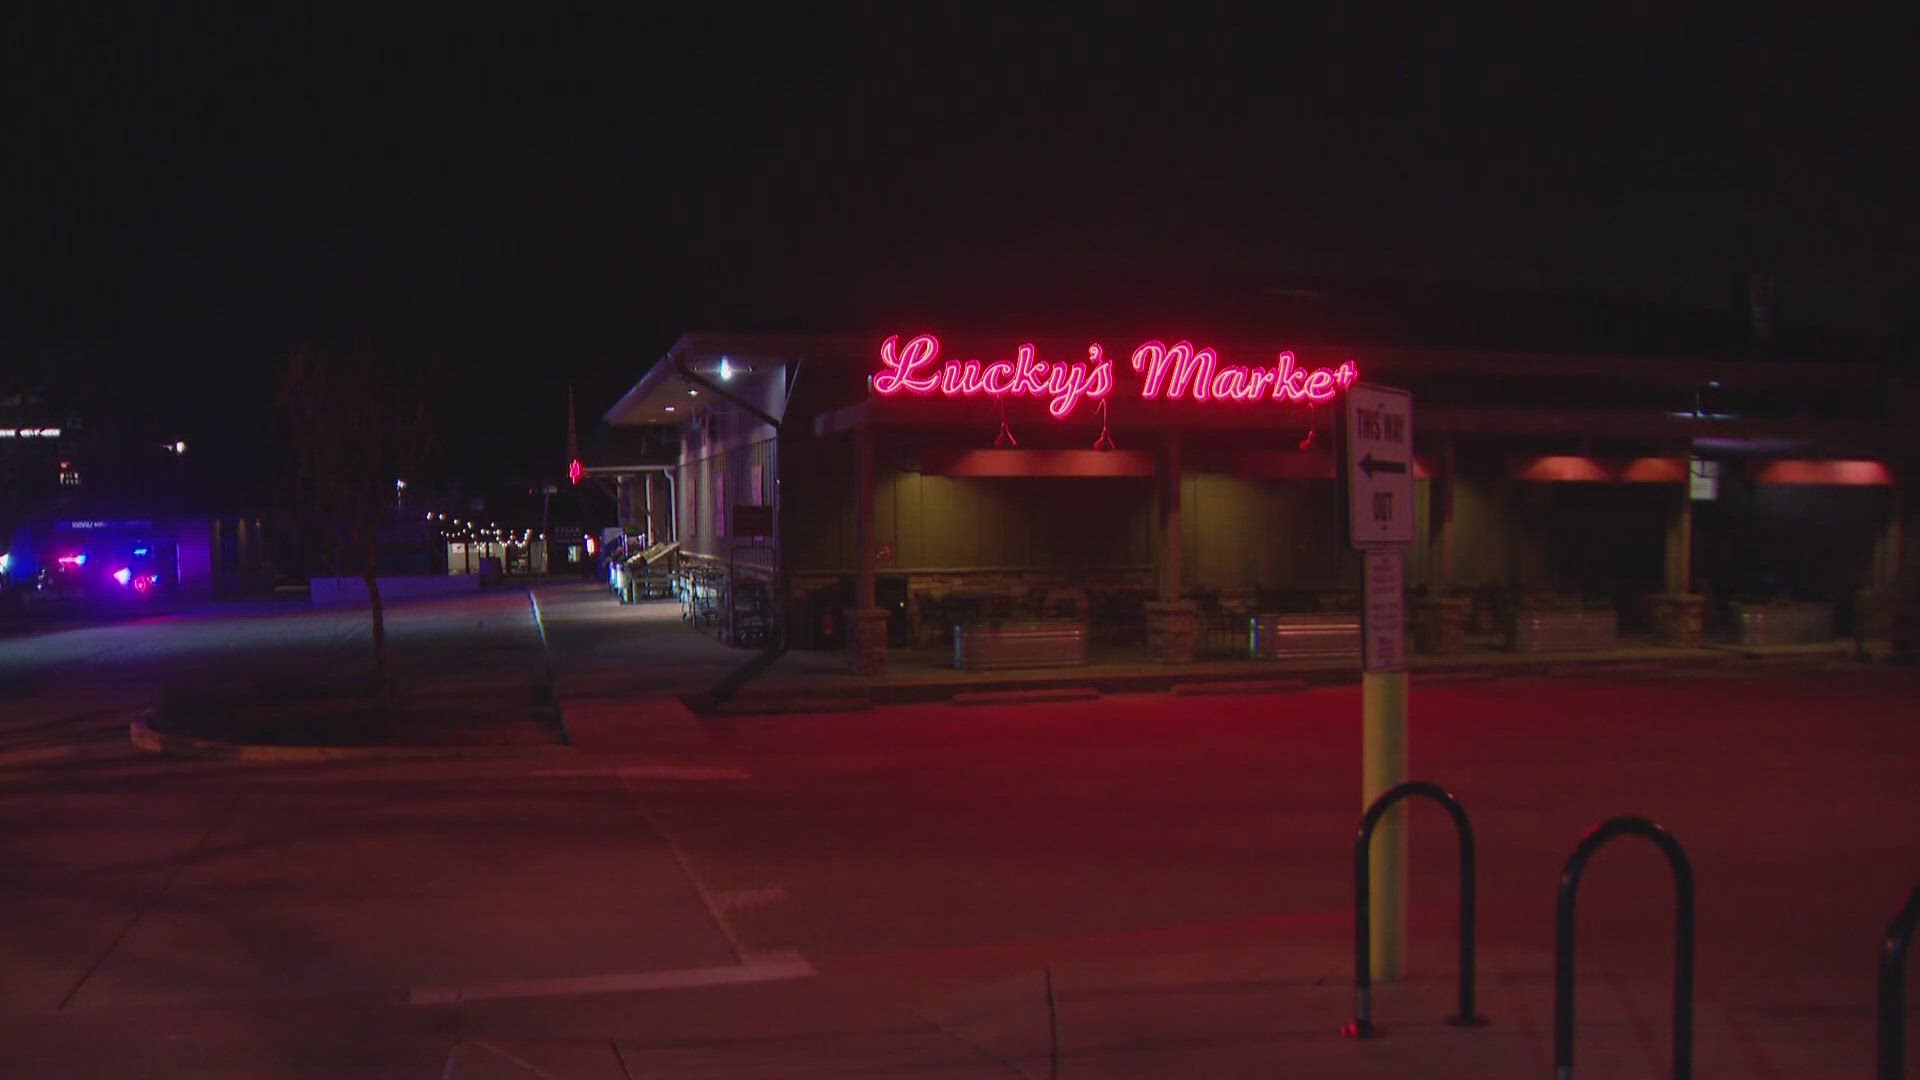 A suspect is in custody after the incident at Lucky's Market.